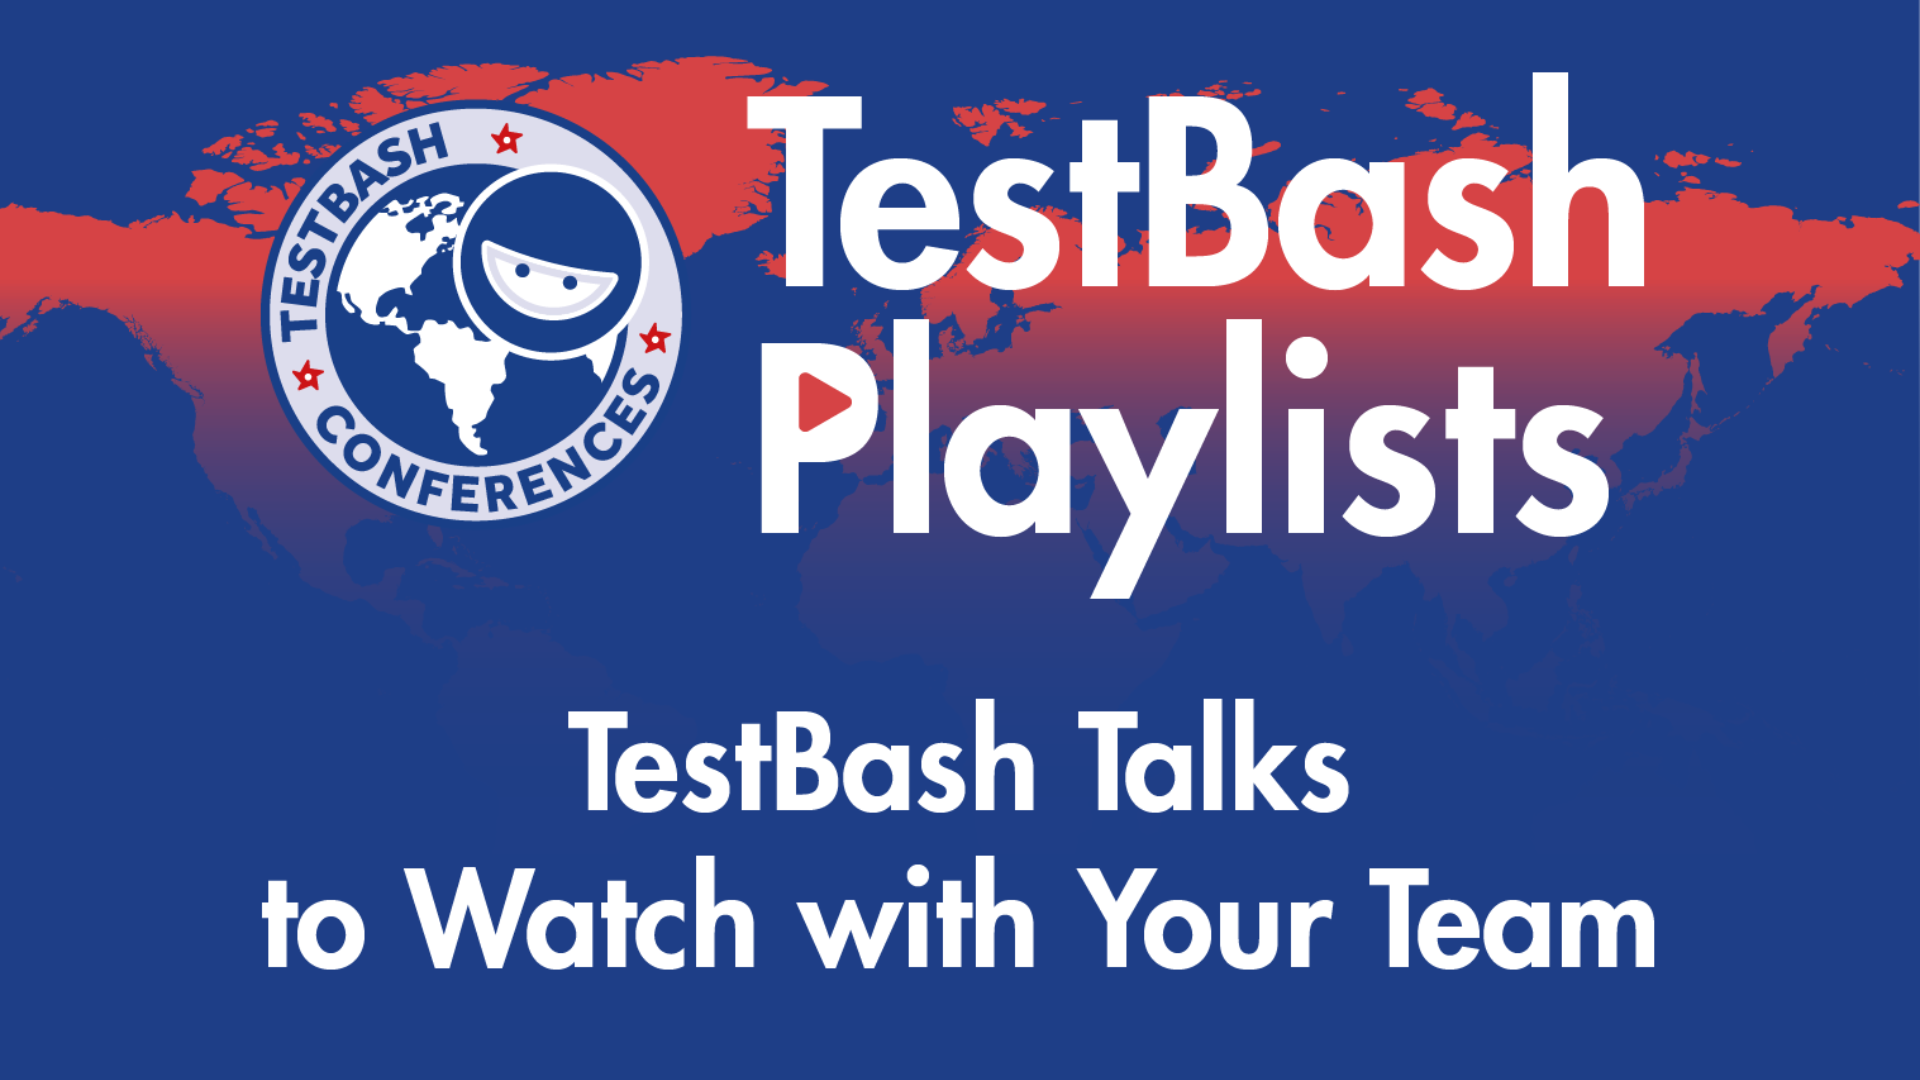 TestBash Playlists - TestBash Talks To Watch With Your Team